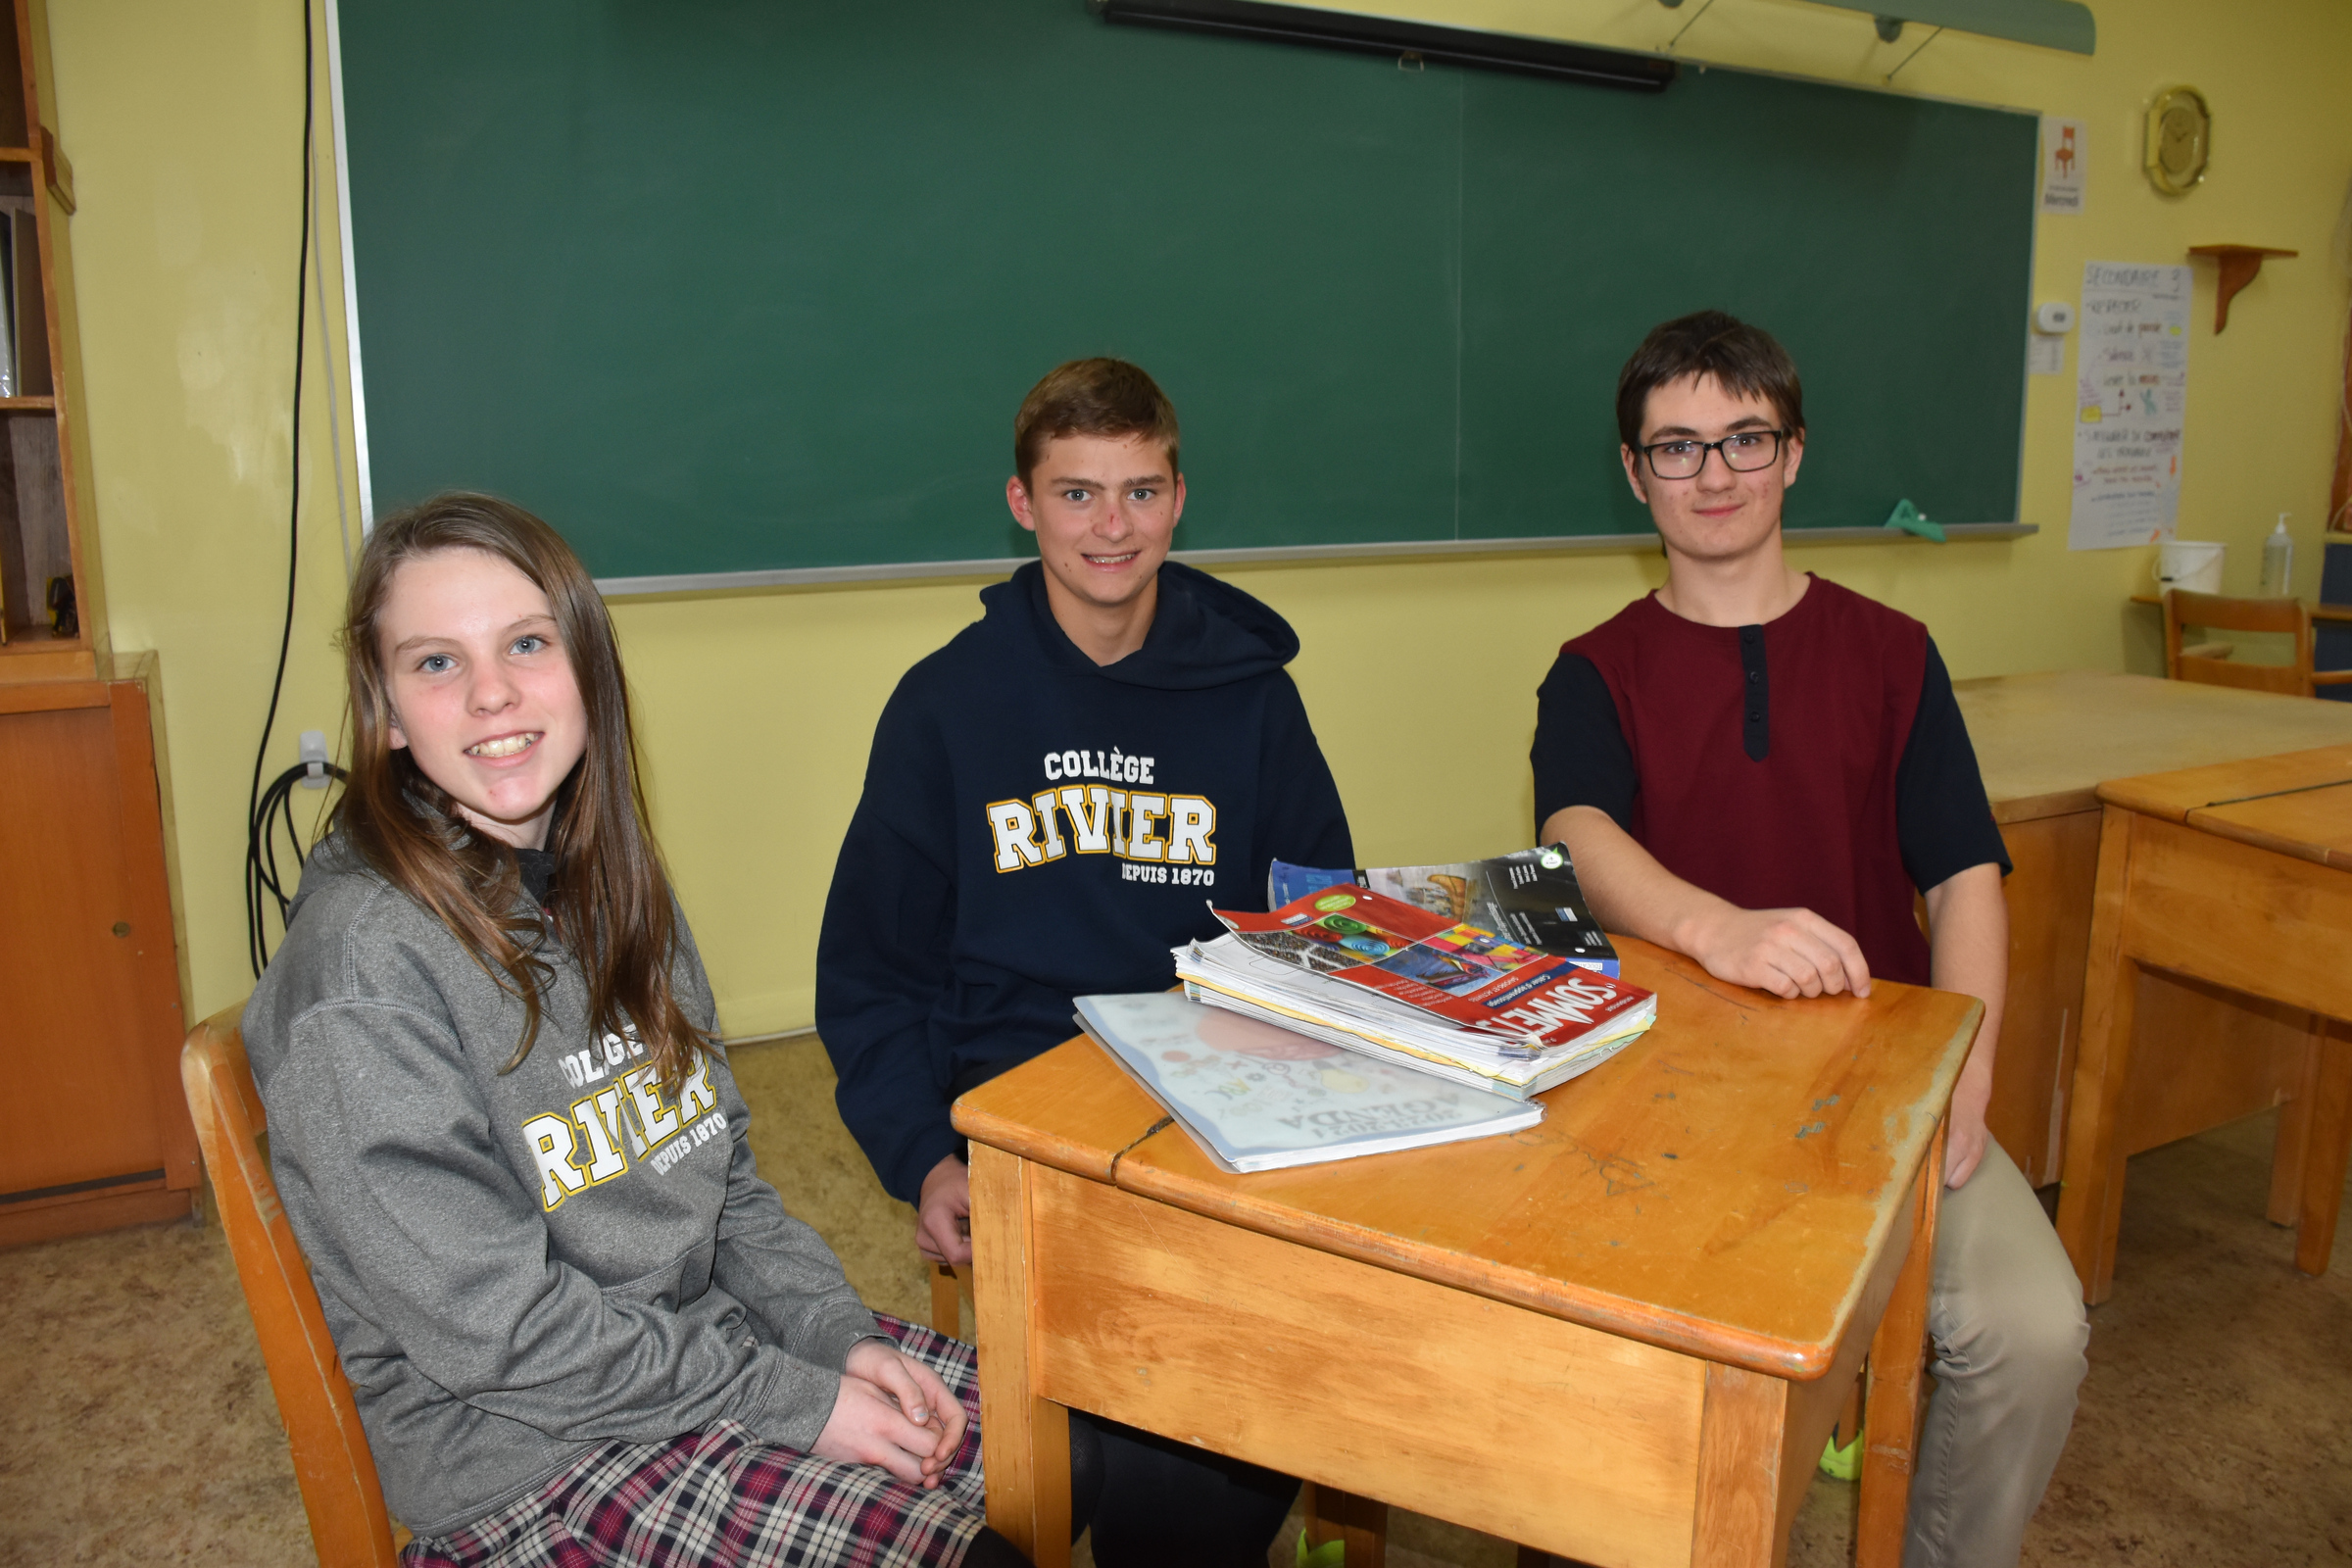 Coatecoque: Three students from Collège Rivier stand out for their perseverance